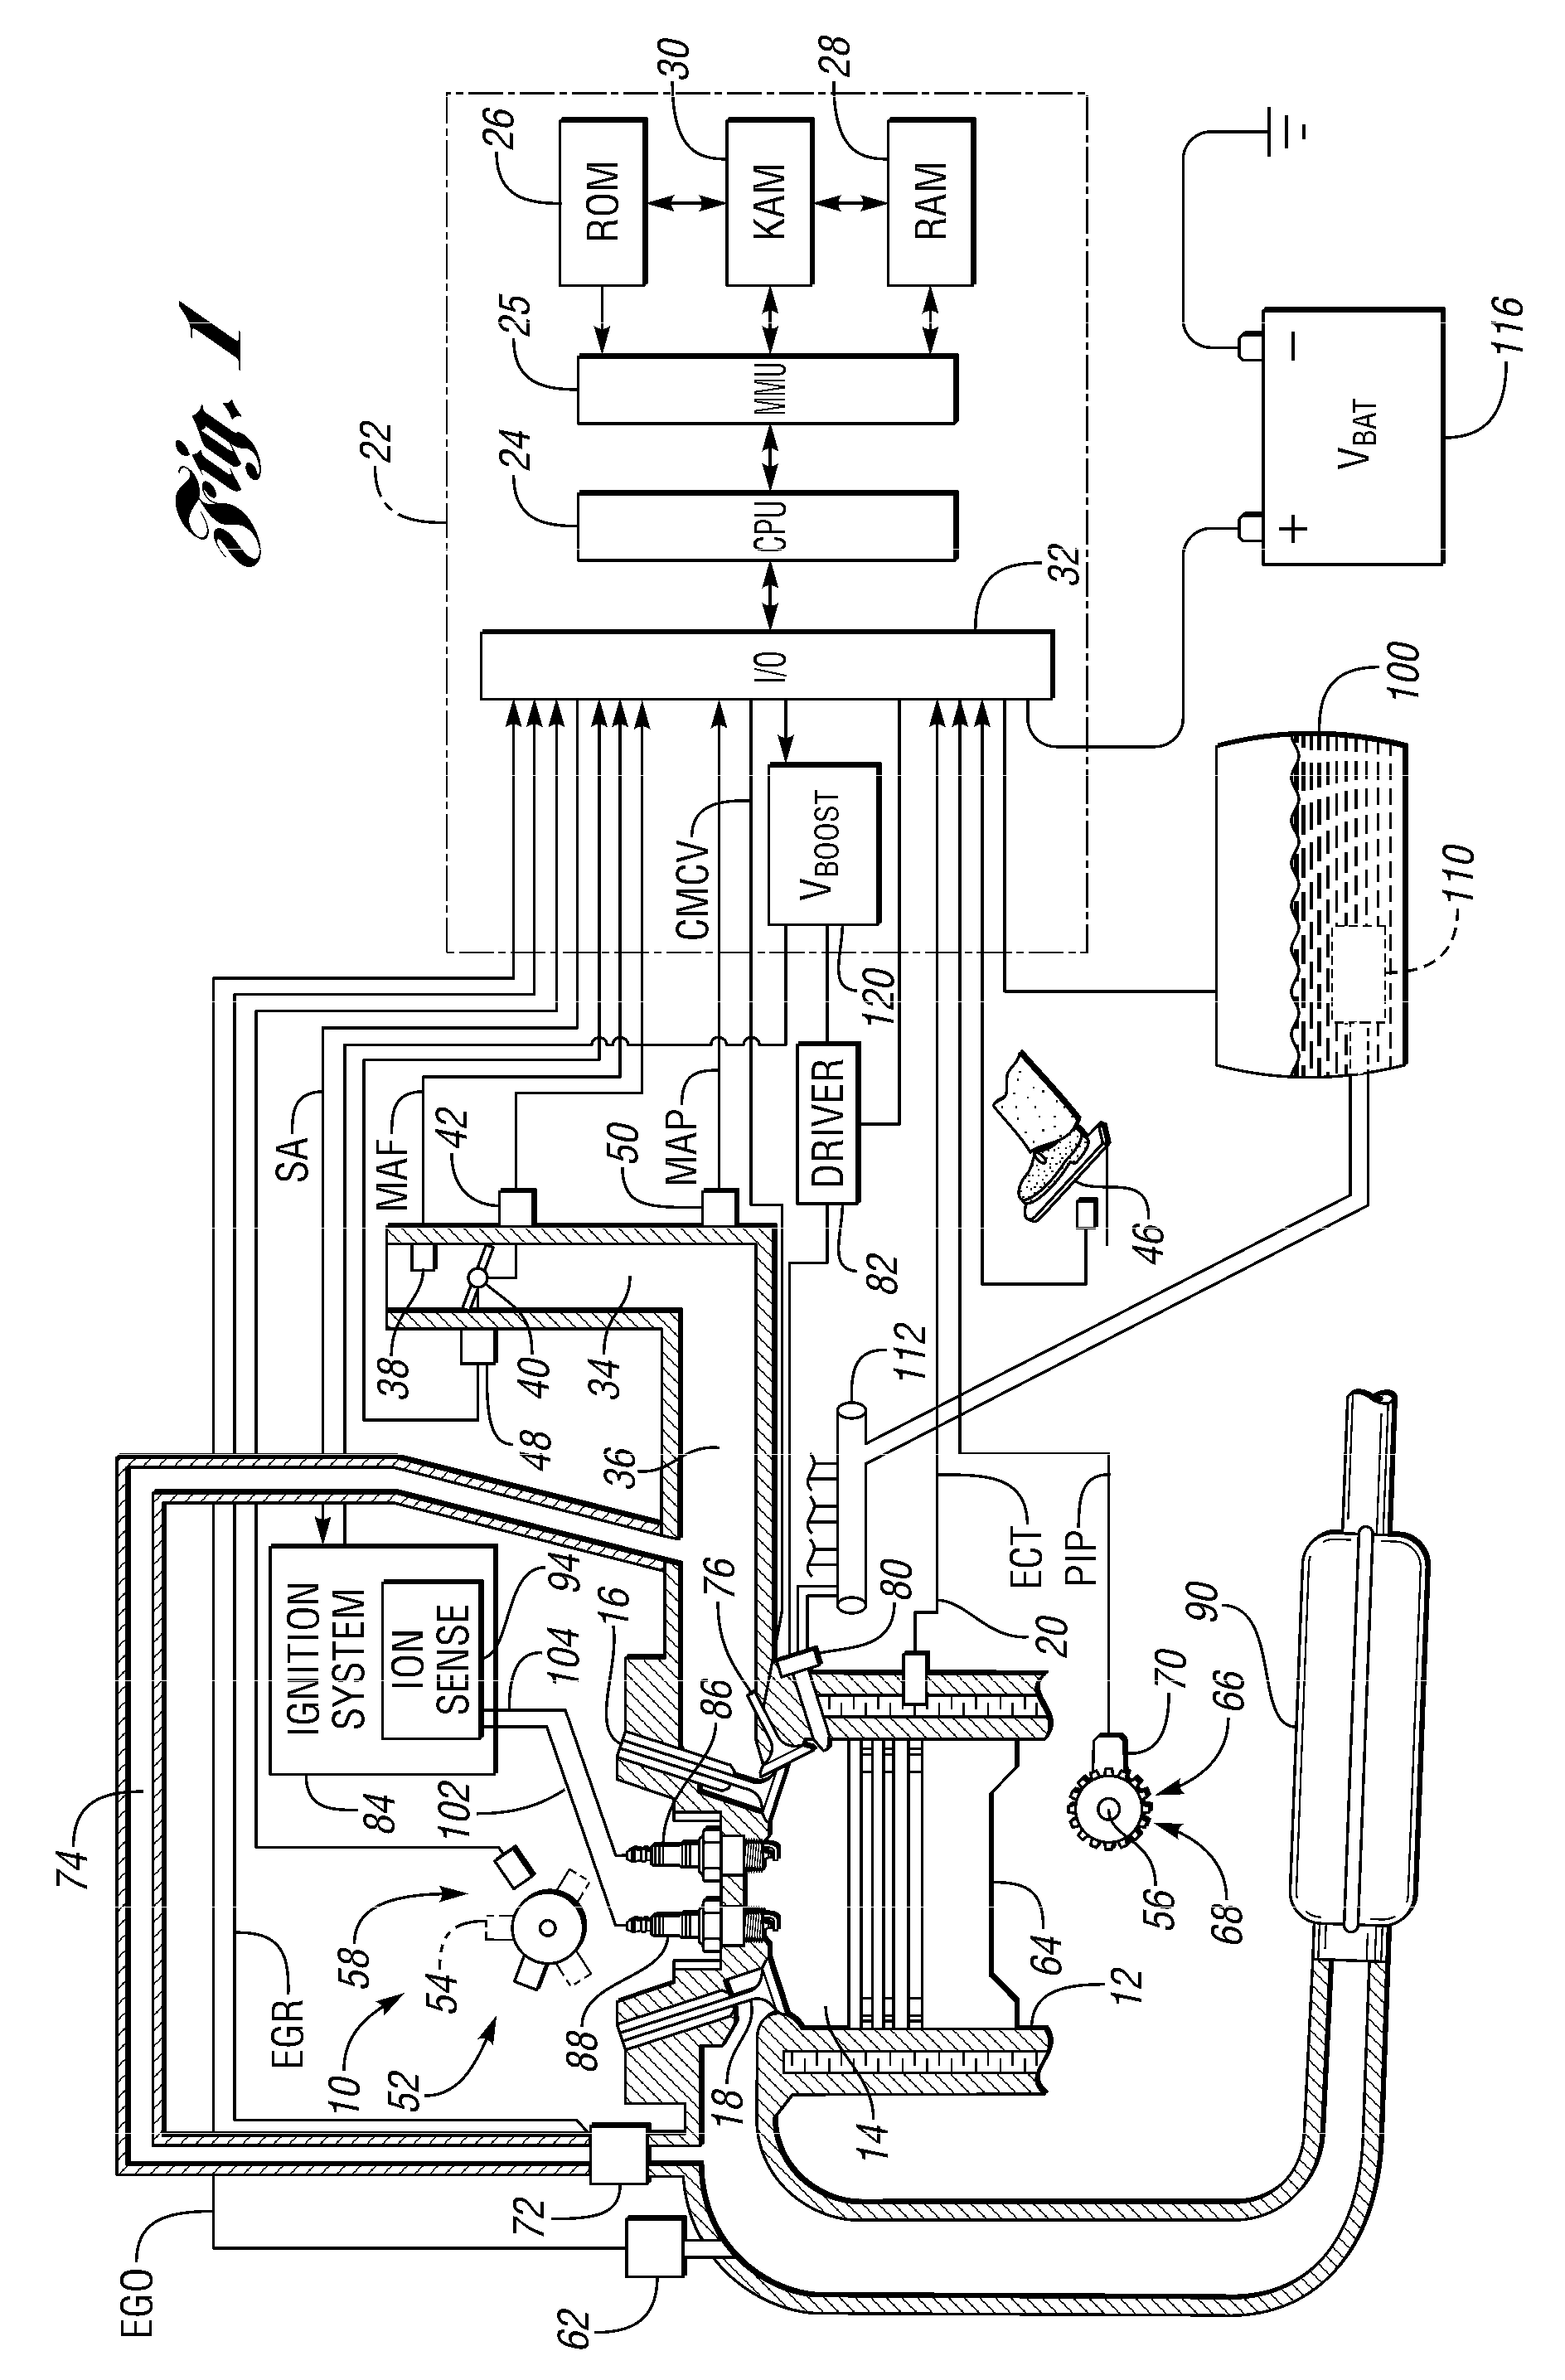 Ignition Coil With Ionization And Digital Feedback For An Internal Combustion Engine